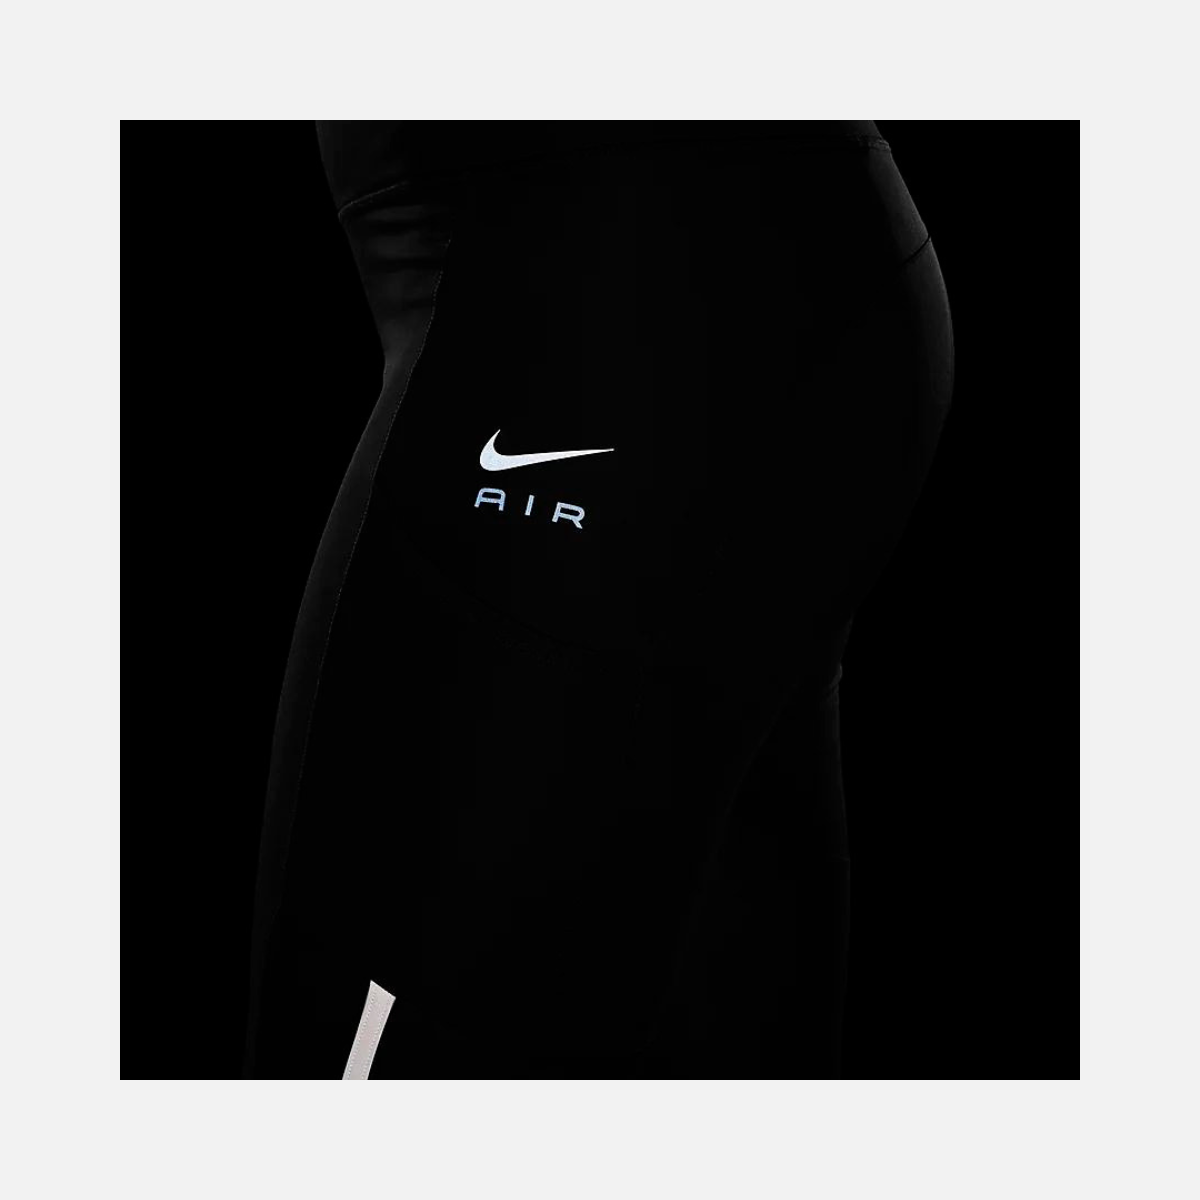 Nike air fast mid-rise 7/8 Women's running leggings with pockets